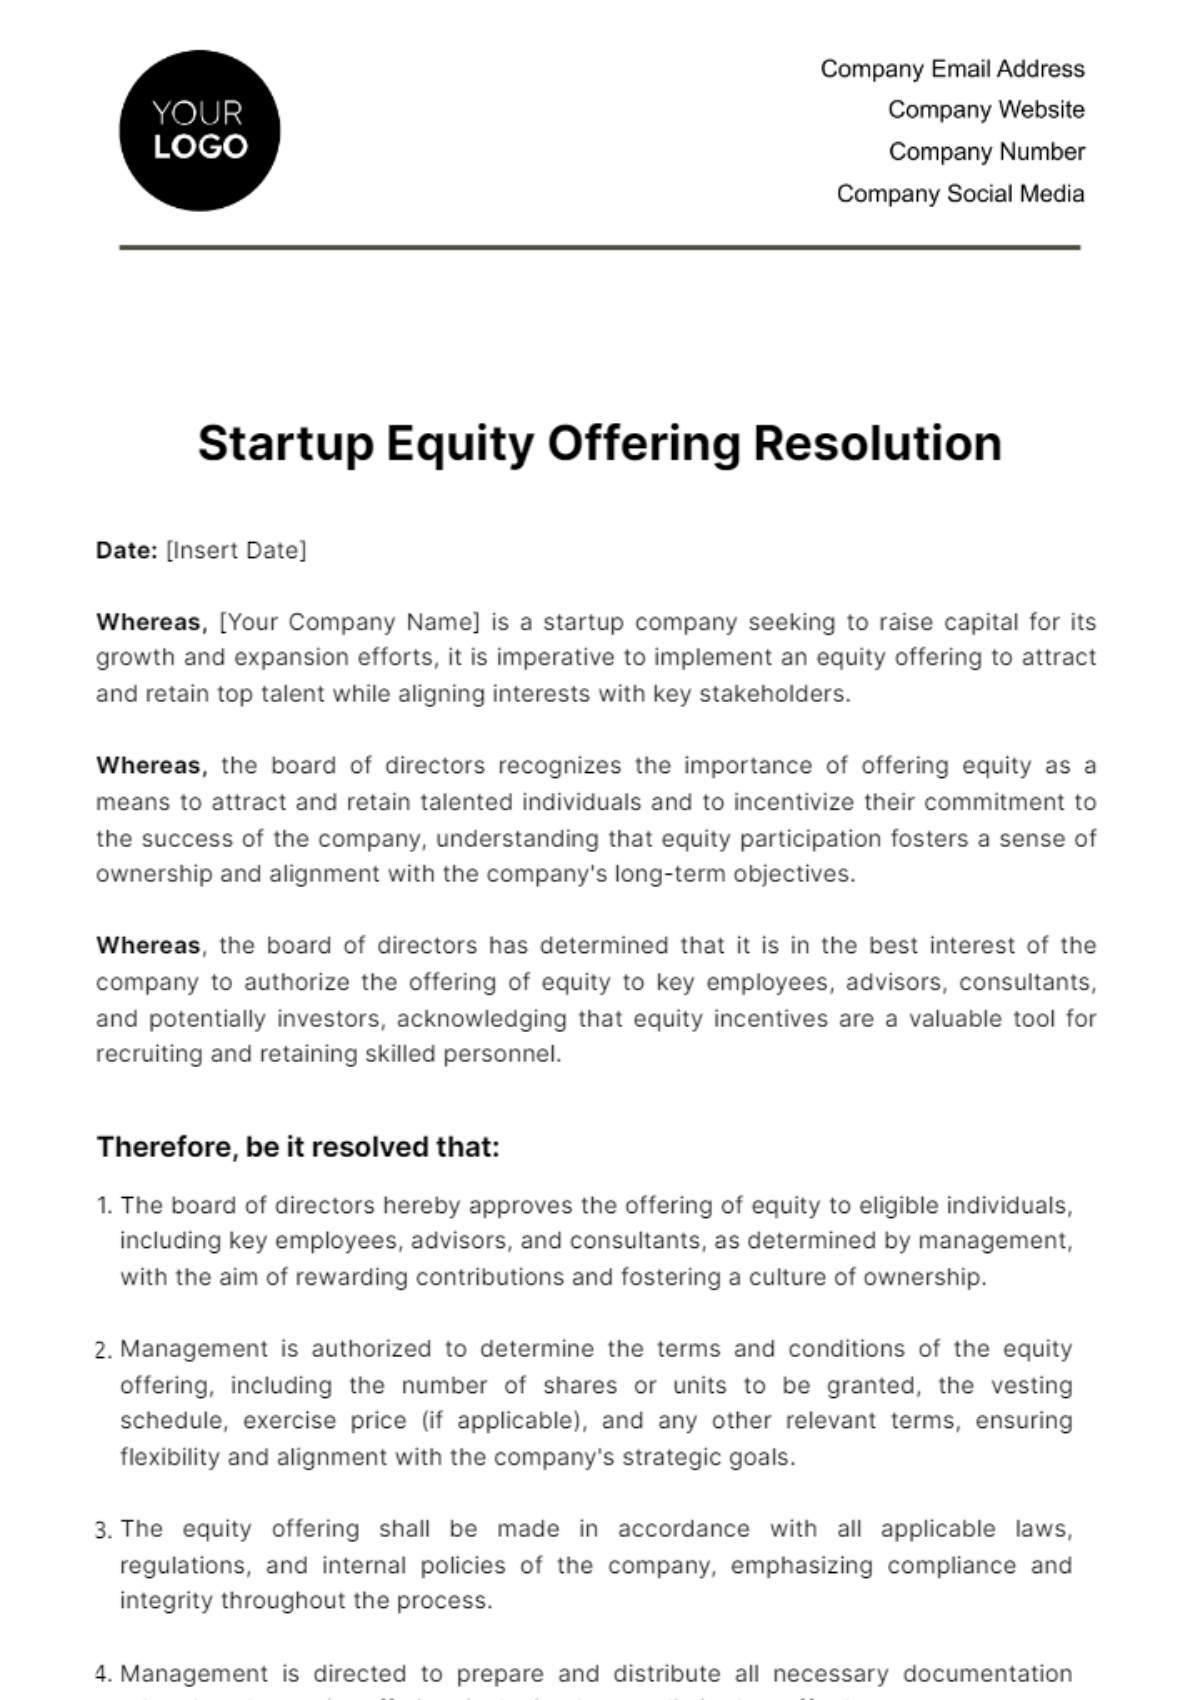 Free Startup Equity Offering Resolution Template